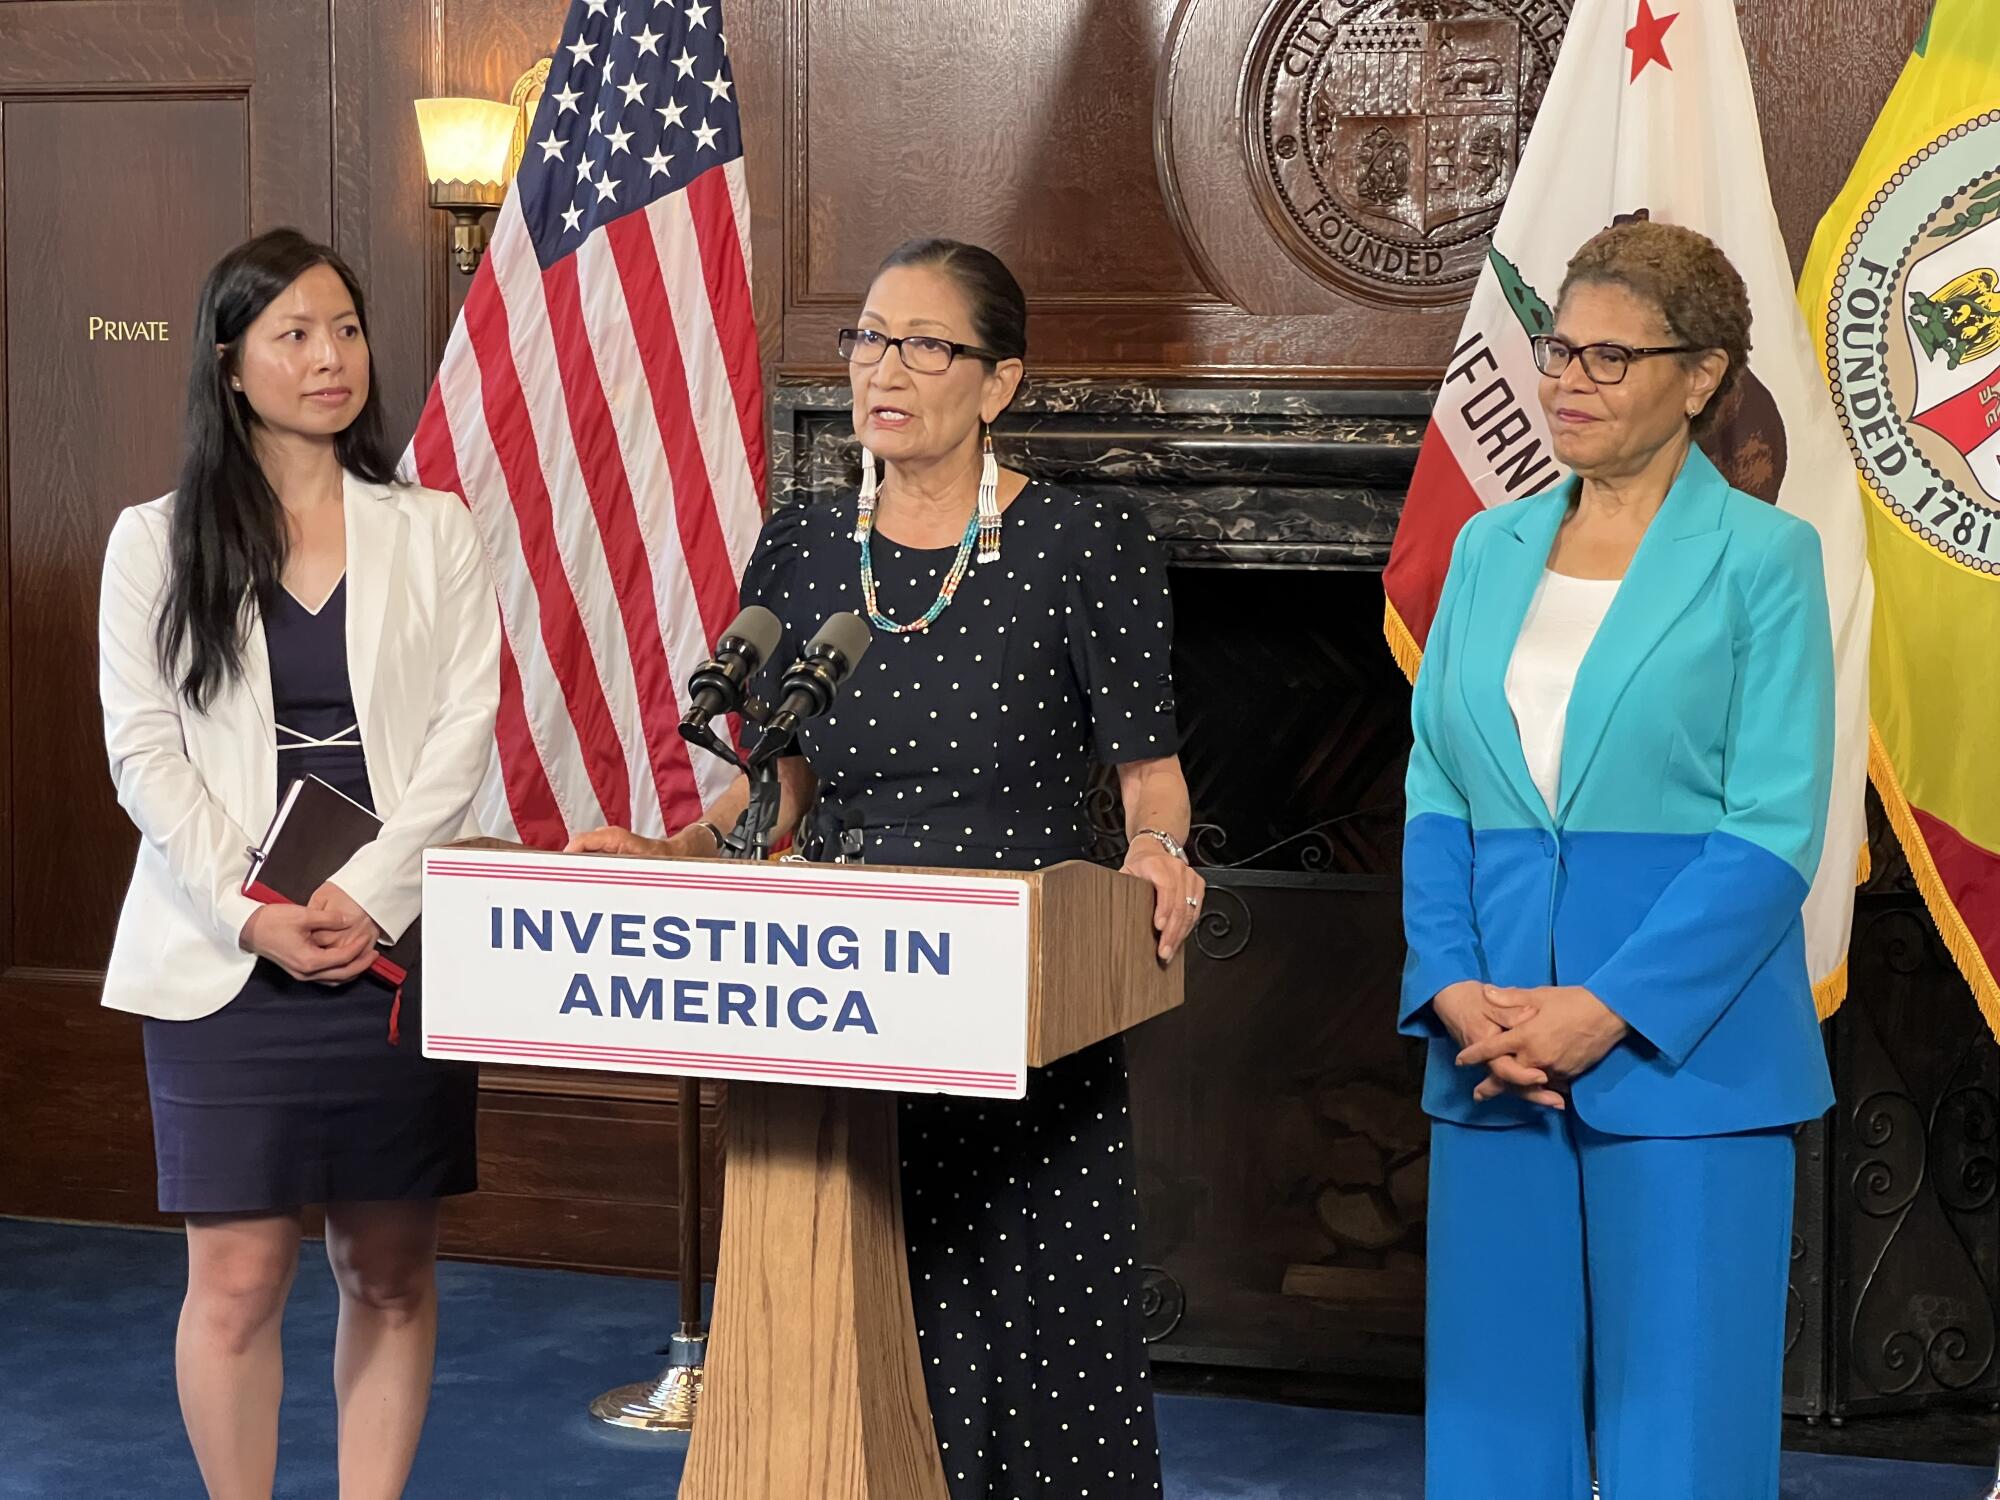 U.S. Secretary of the Interior Deb Haaland speaks at a lectern, flanked by officials Le-Quyen Nguyen, left, and Karen Bass.